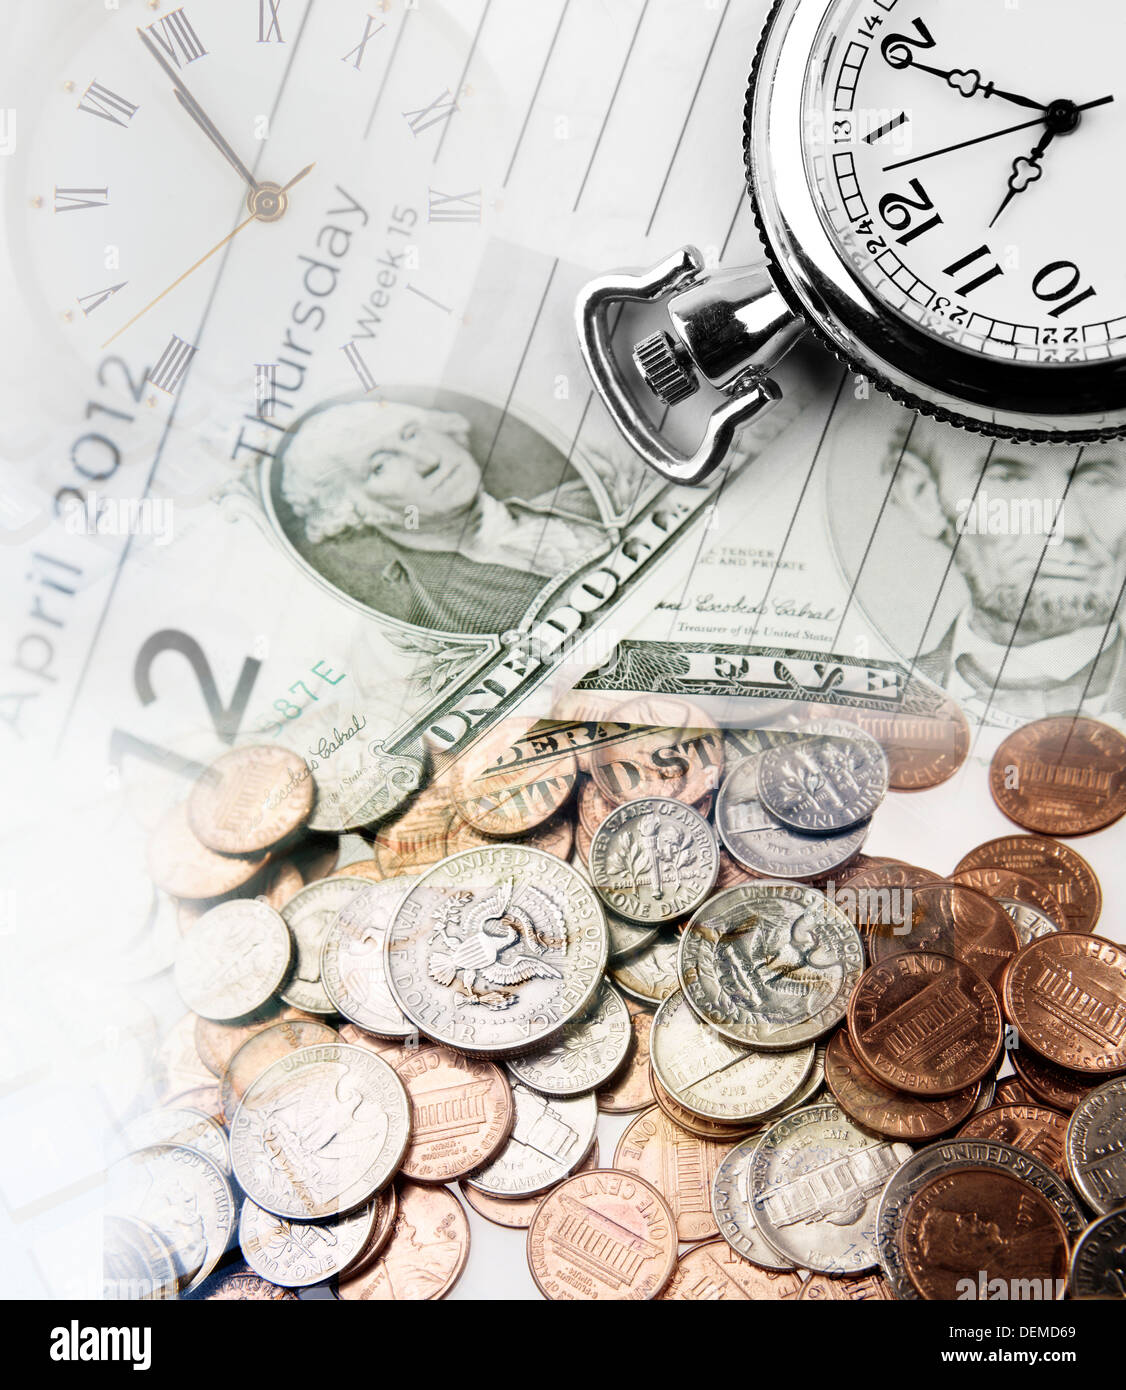 Clocks, banknotes and coins. Time is money concept Stock Photo